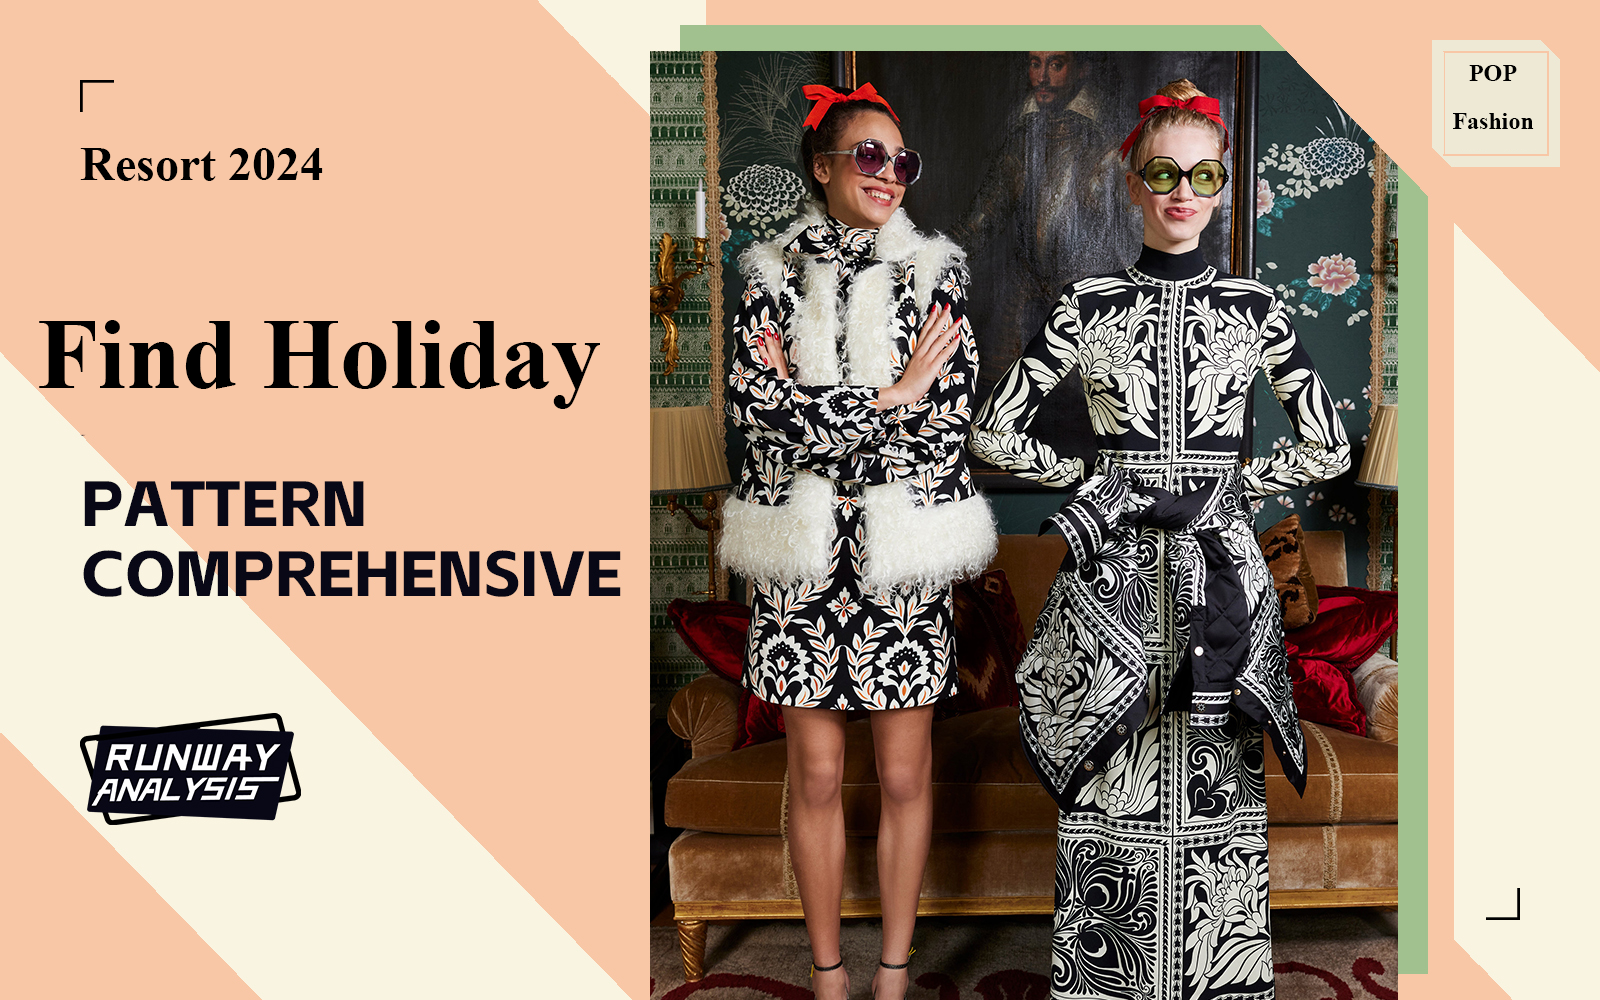 Find Holiday -- The Comprehensive Runway Analysis of Womenswear